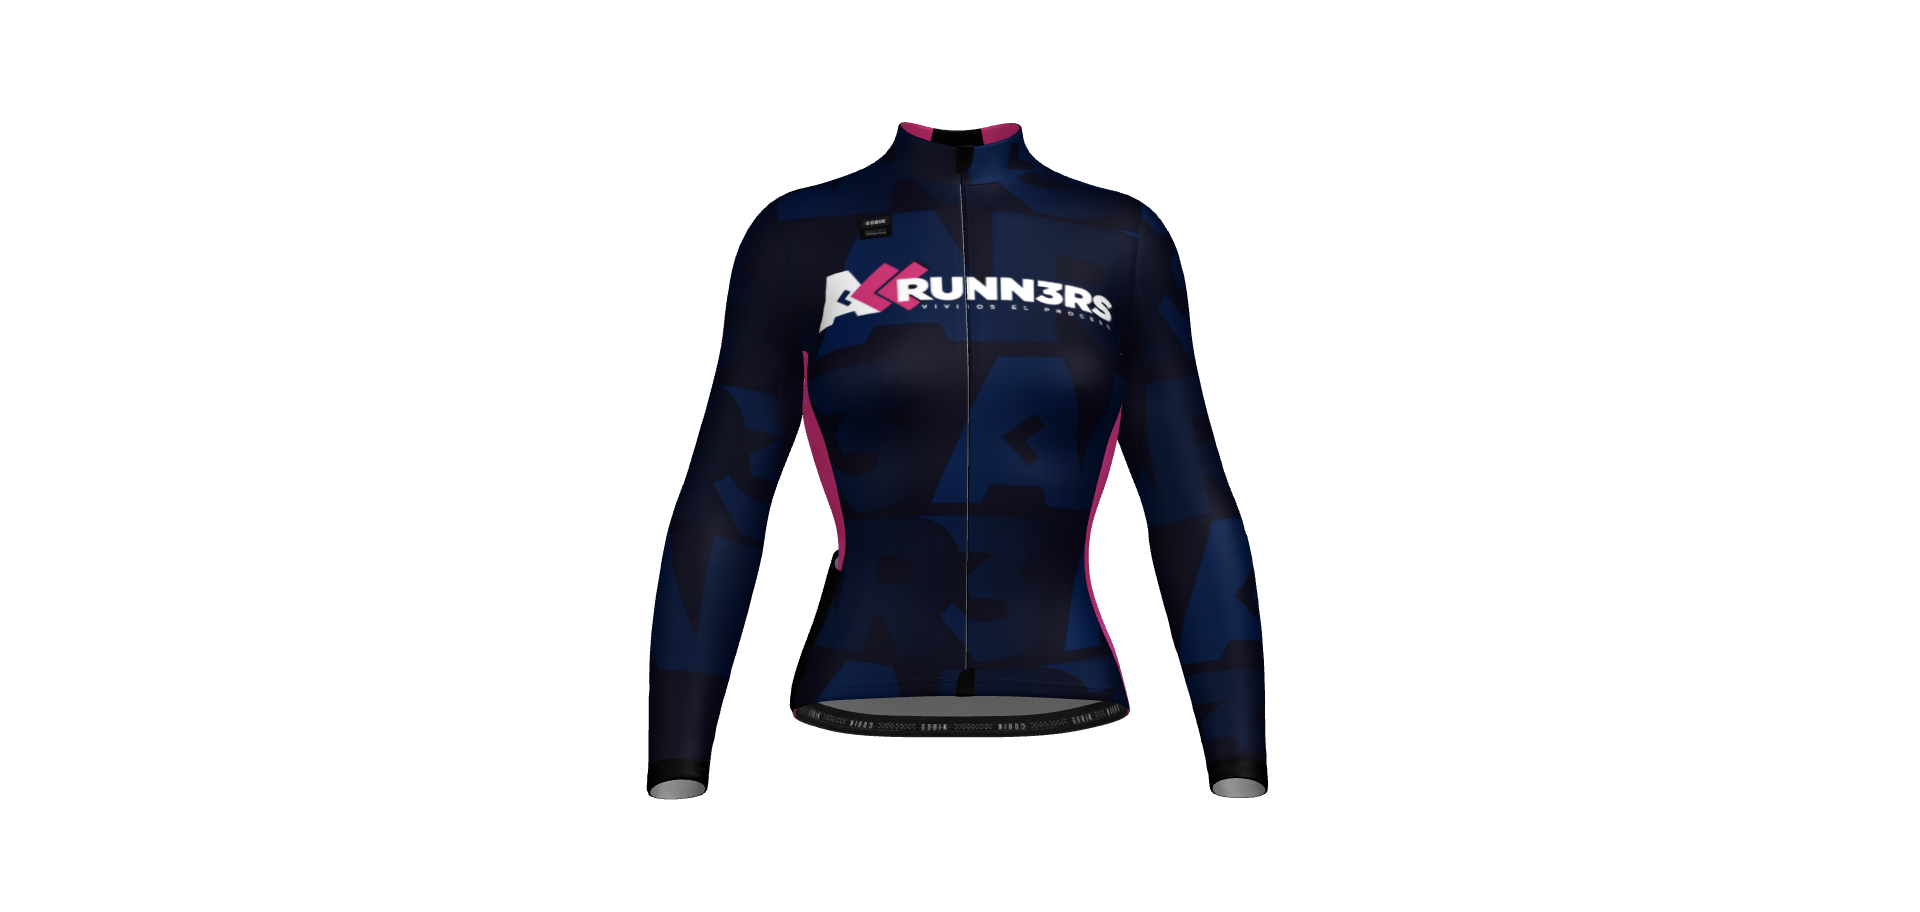 TEAM ALL3RUNNERS CHAQUETA MIST MUJER